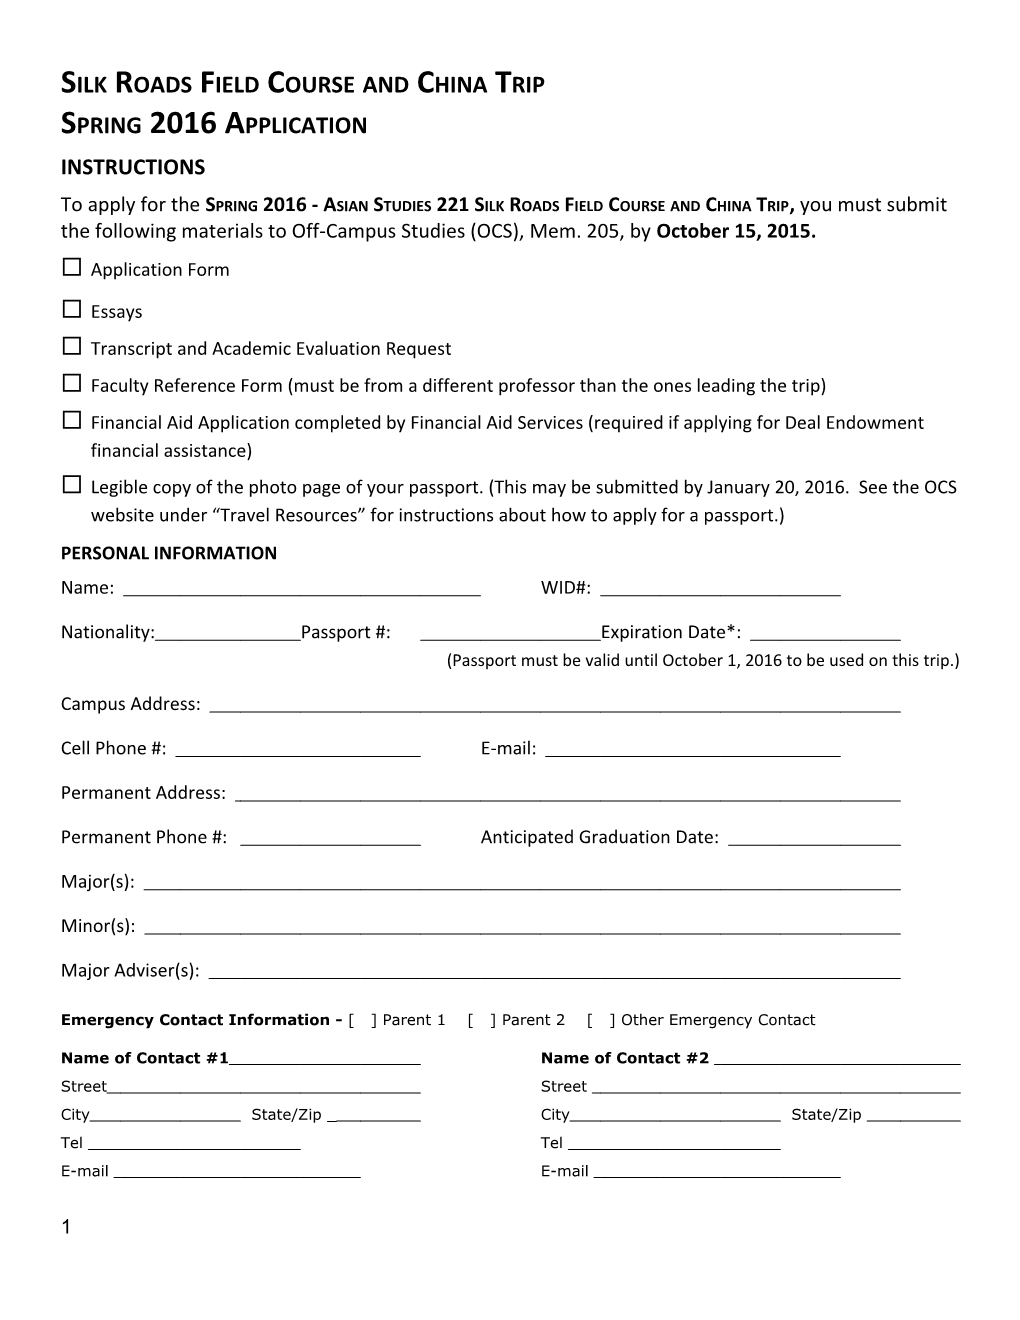 Whitman College Foreign Study Leave Application